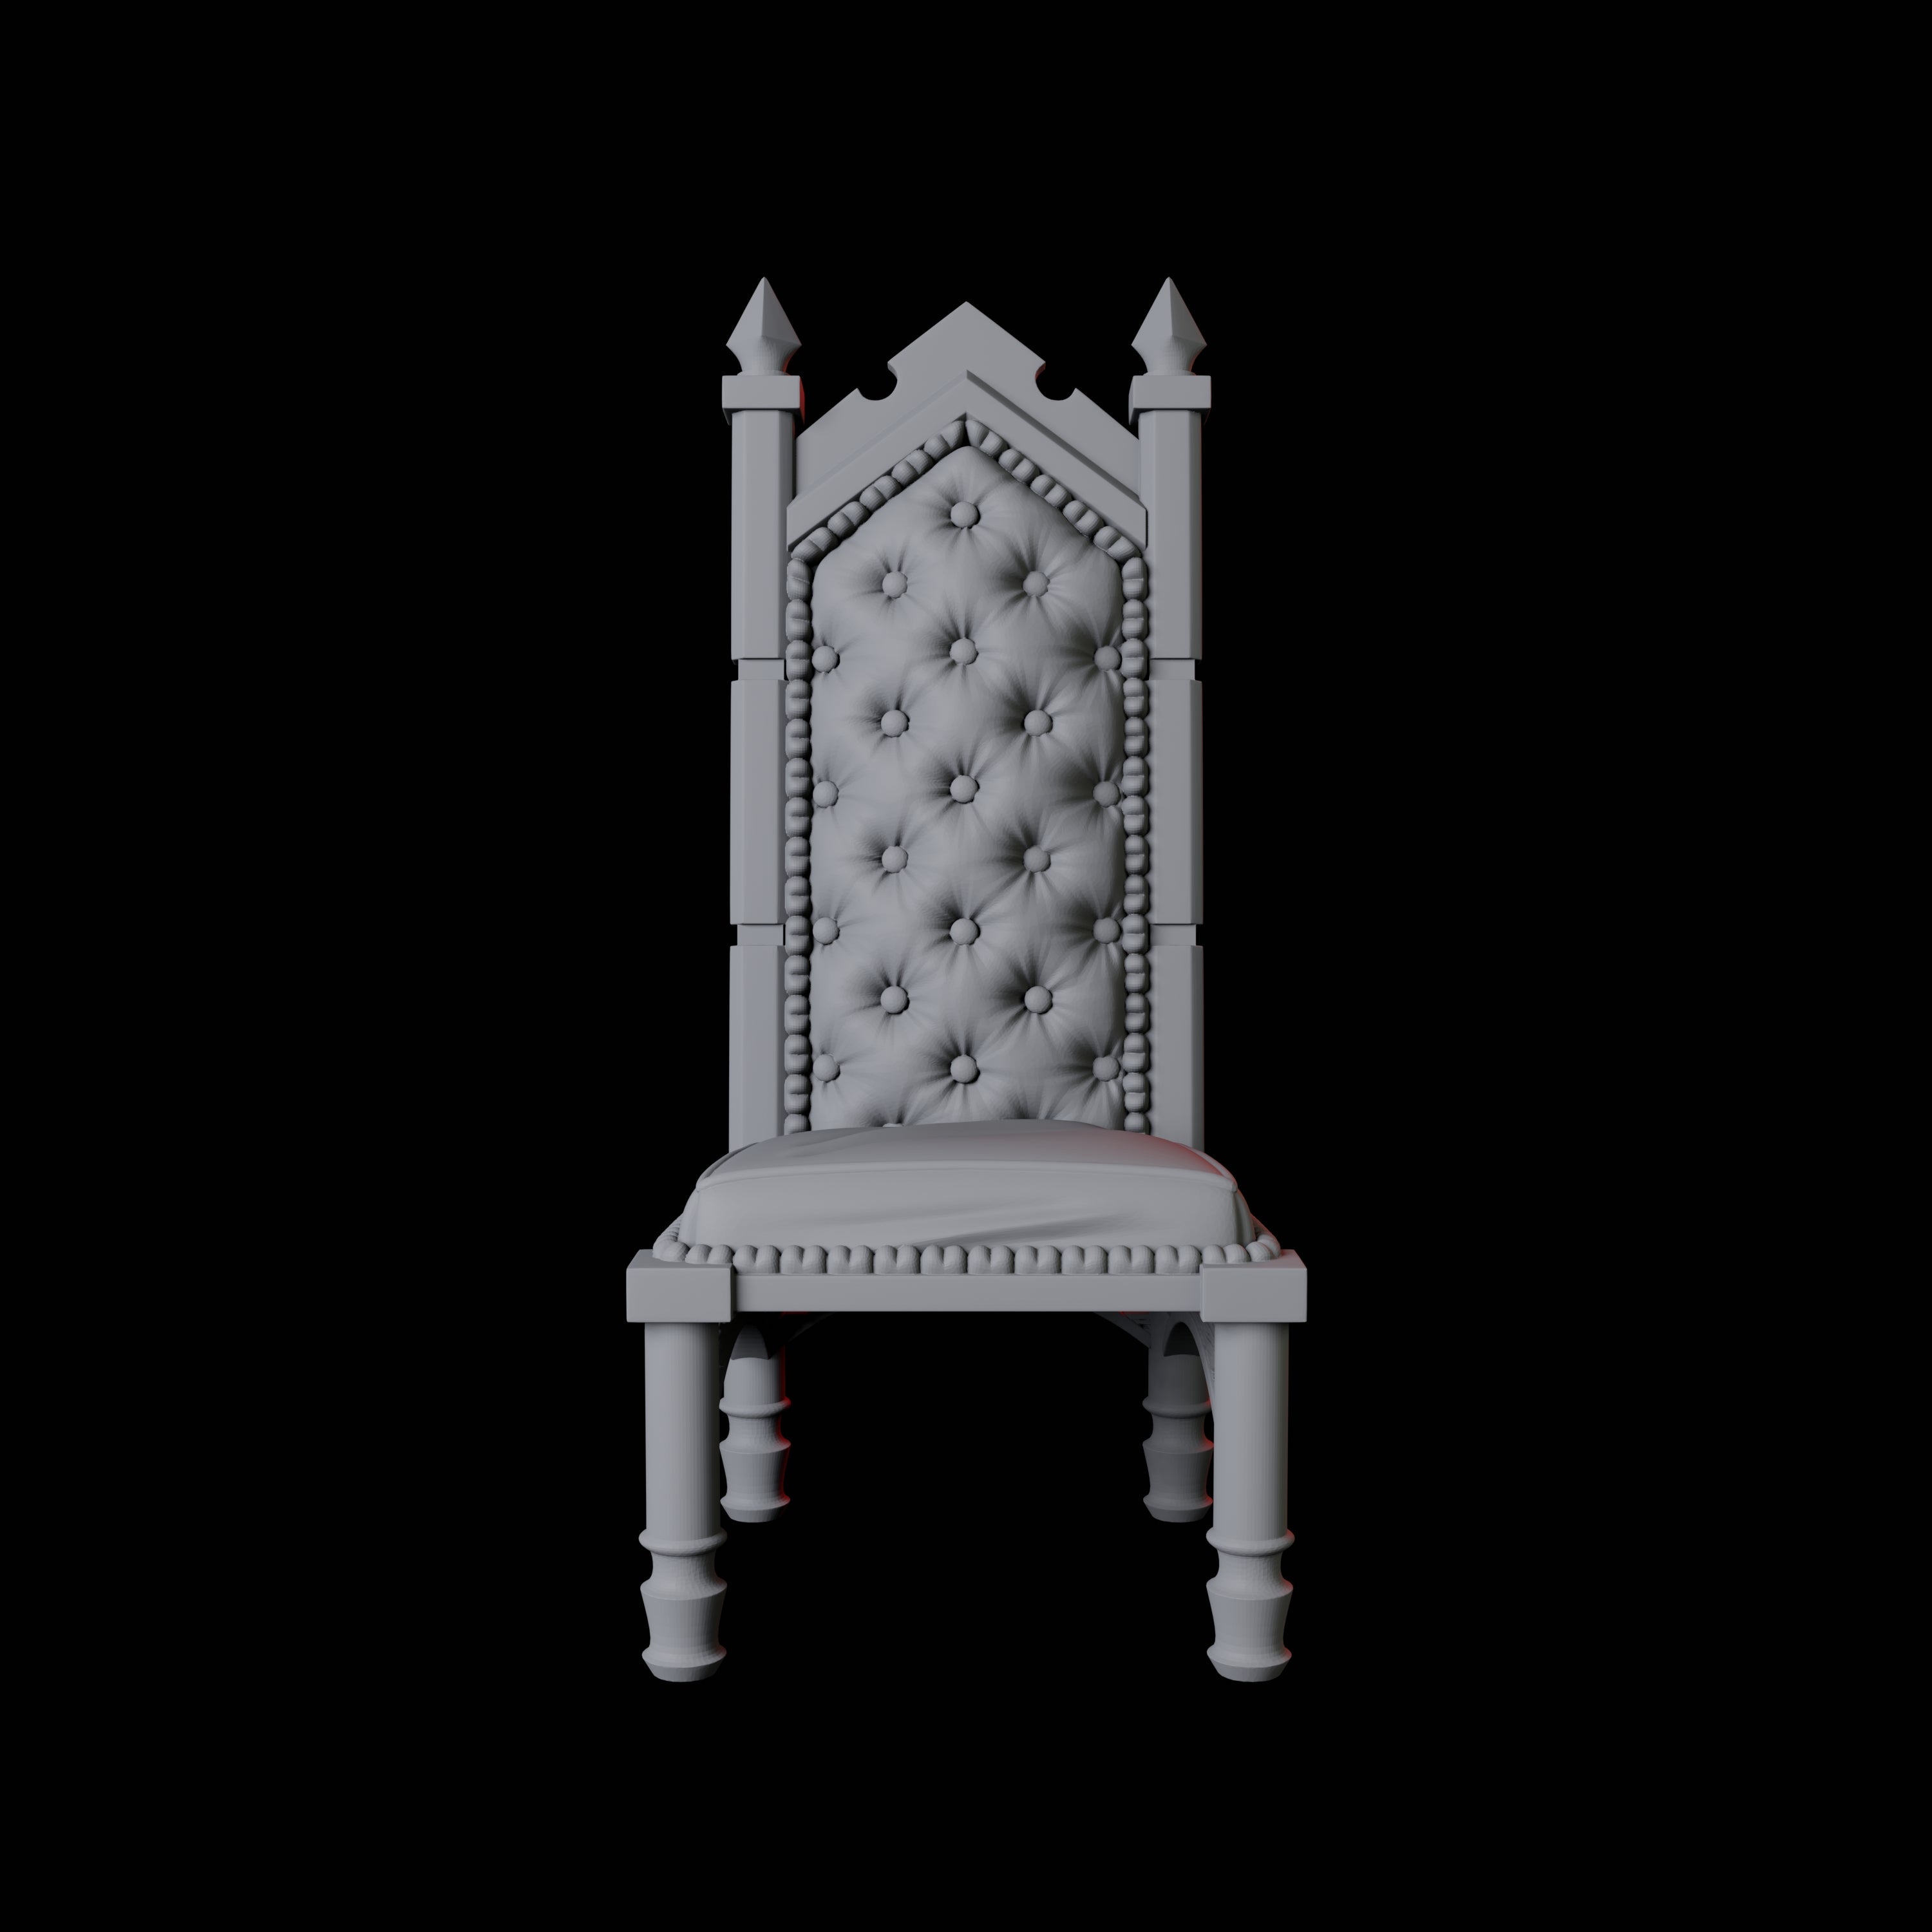 Chair Miniature for Dungeons and Dragons, Pathfinder or other TTRPGs